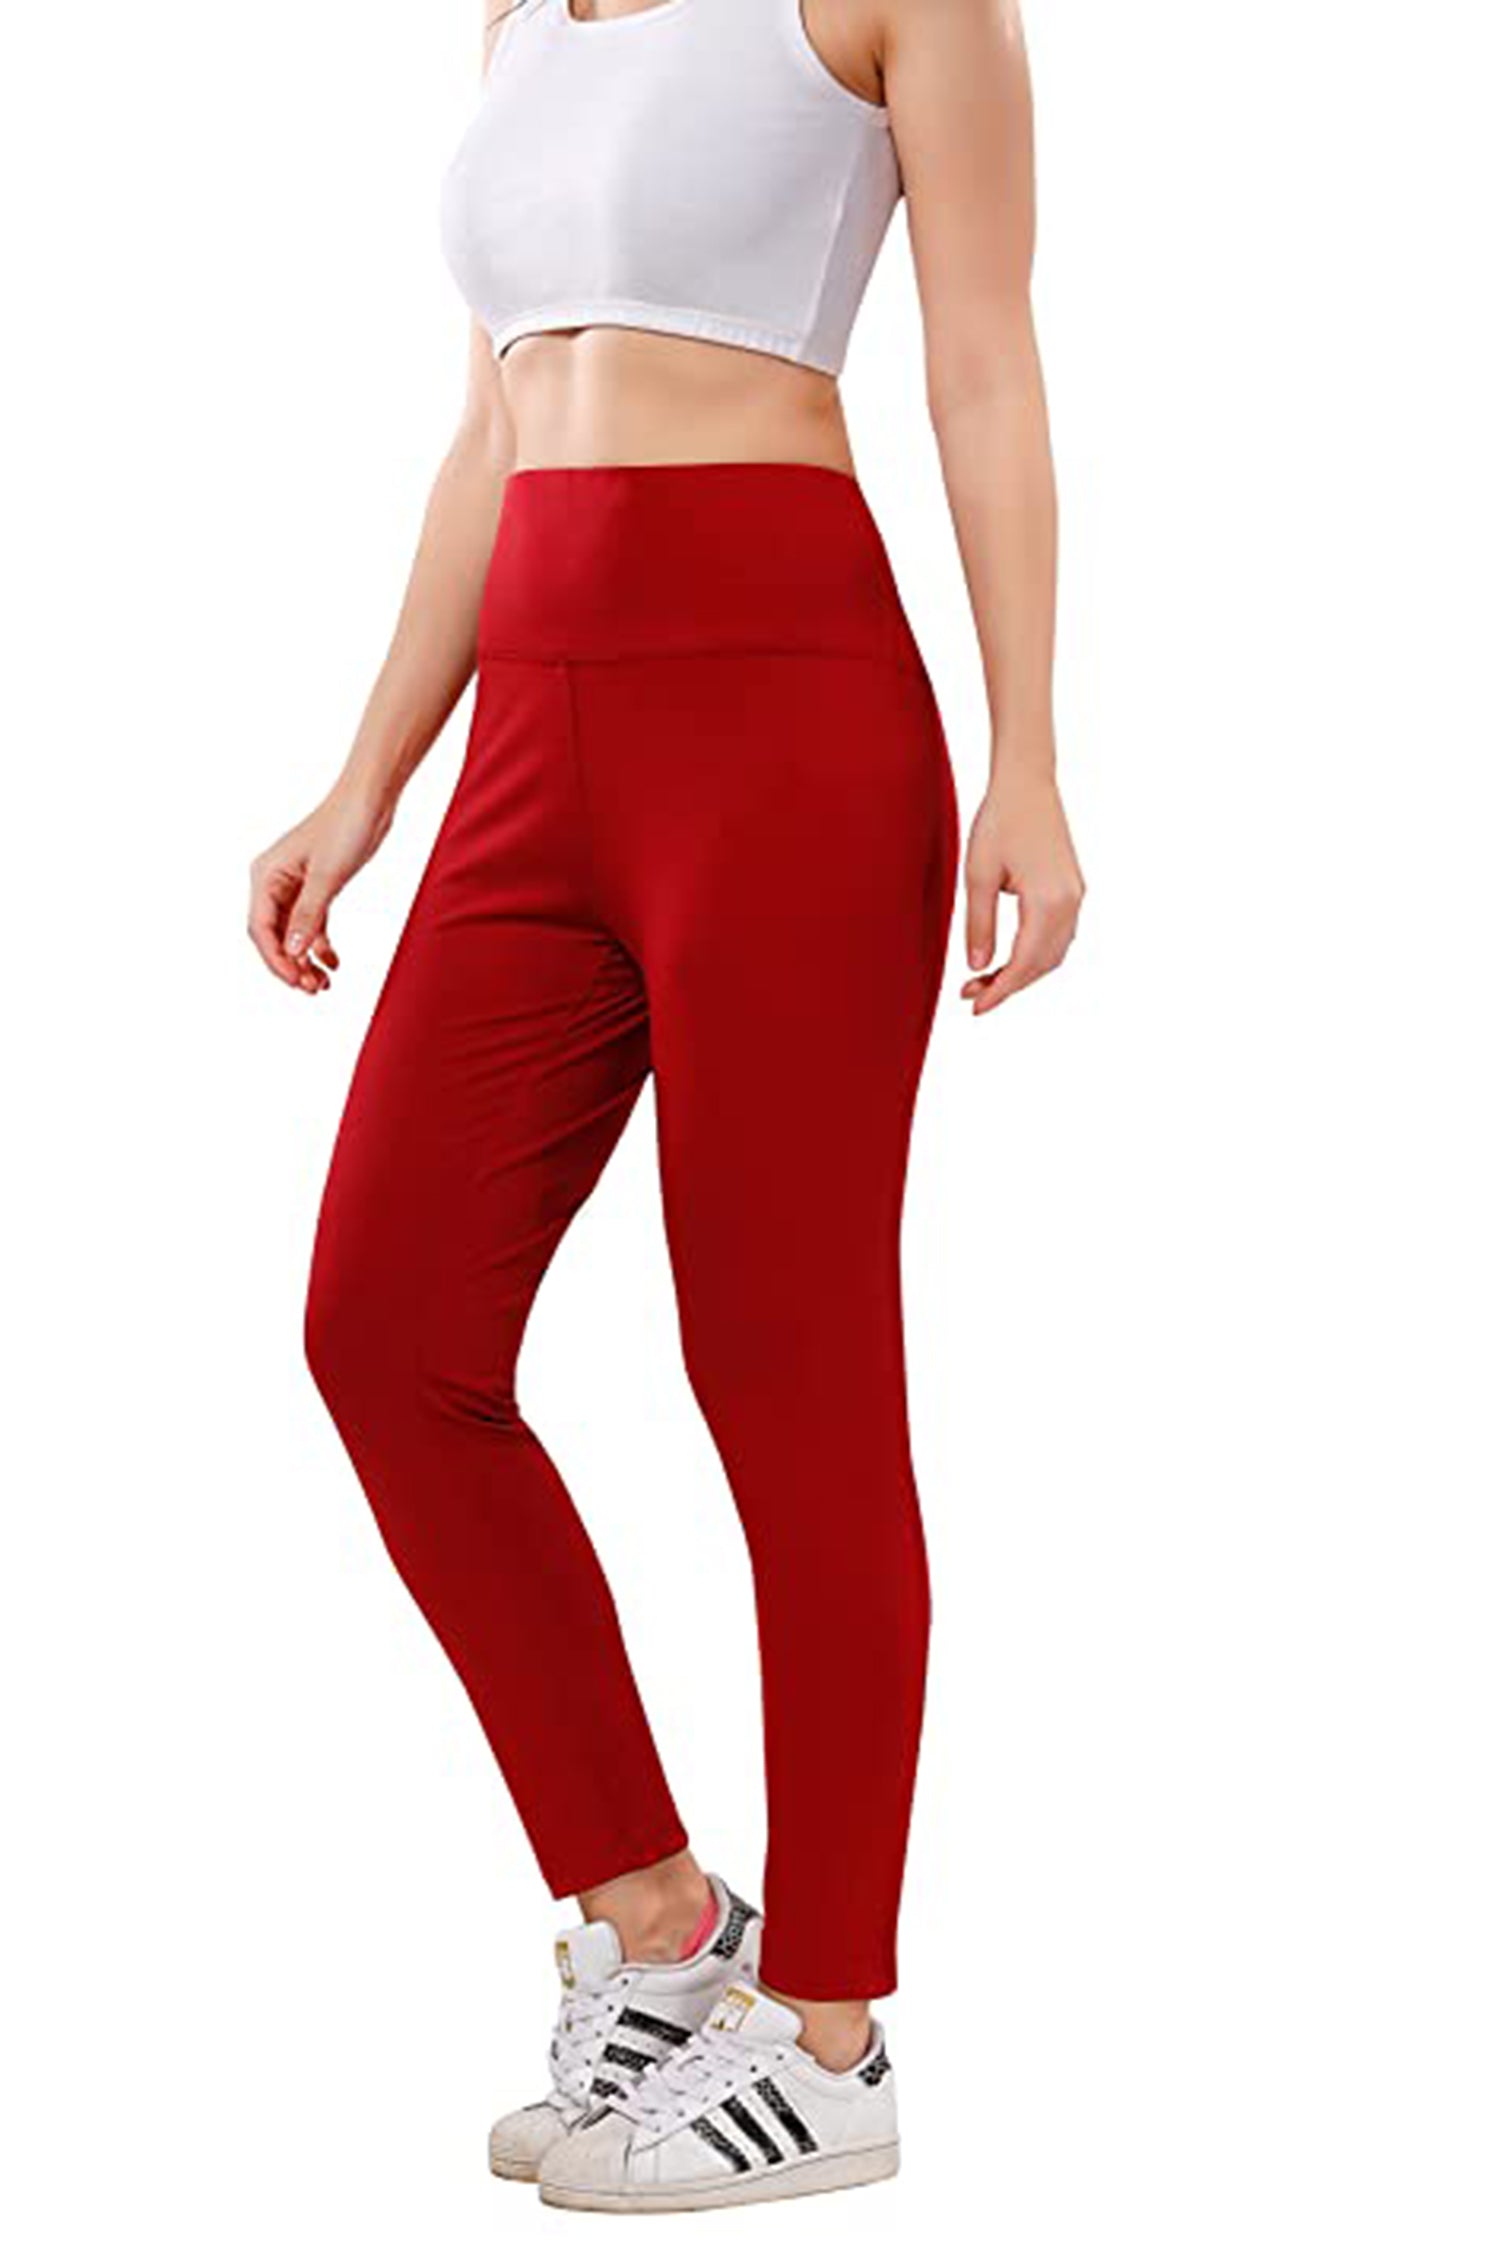 TRASA High Waist Active Yoga Pants for Women's with 2 Pockets - Maroon –